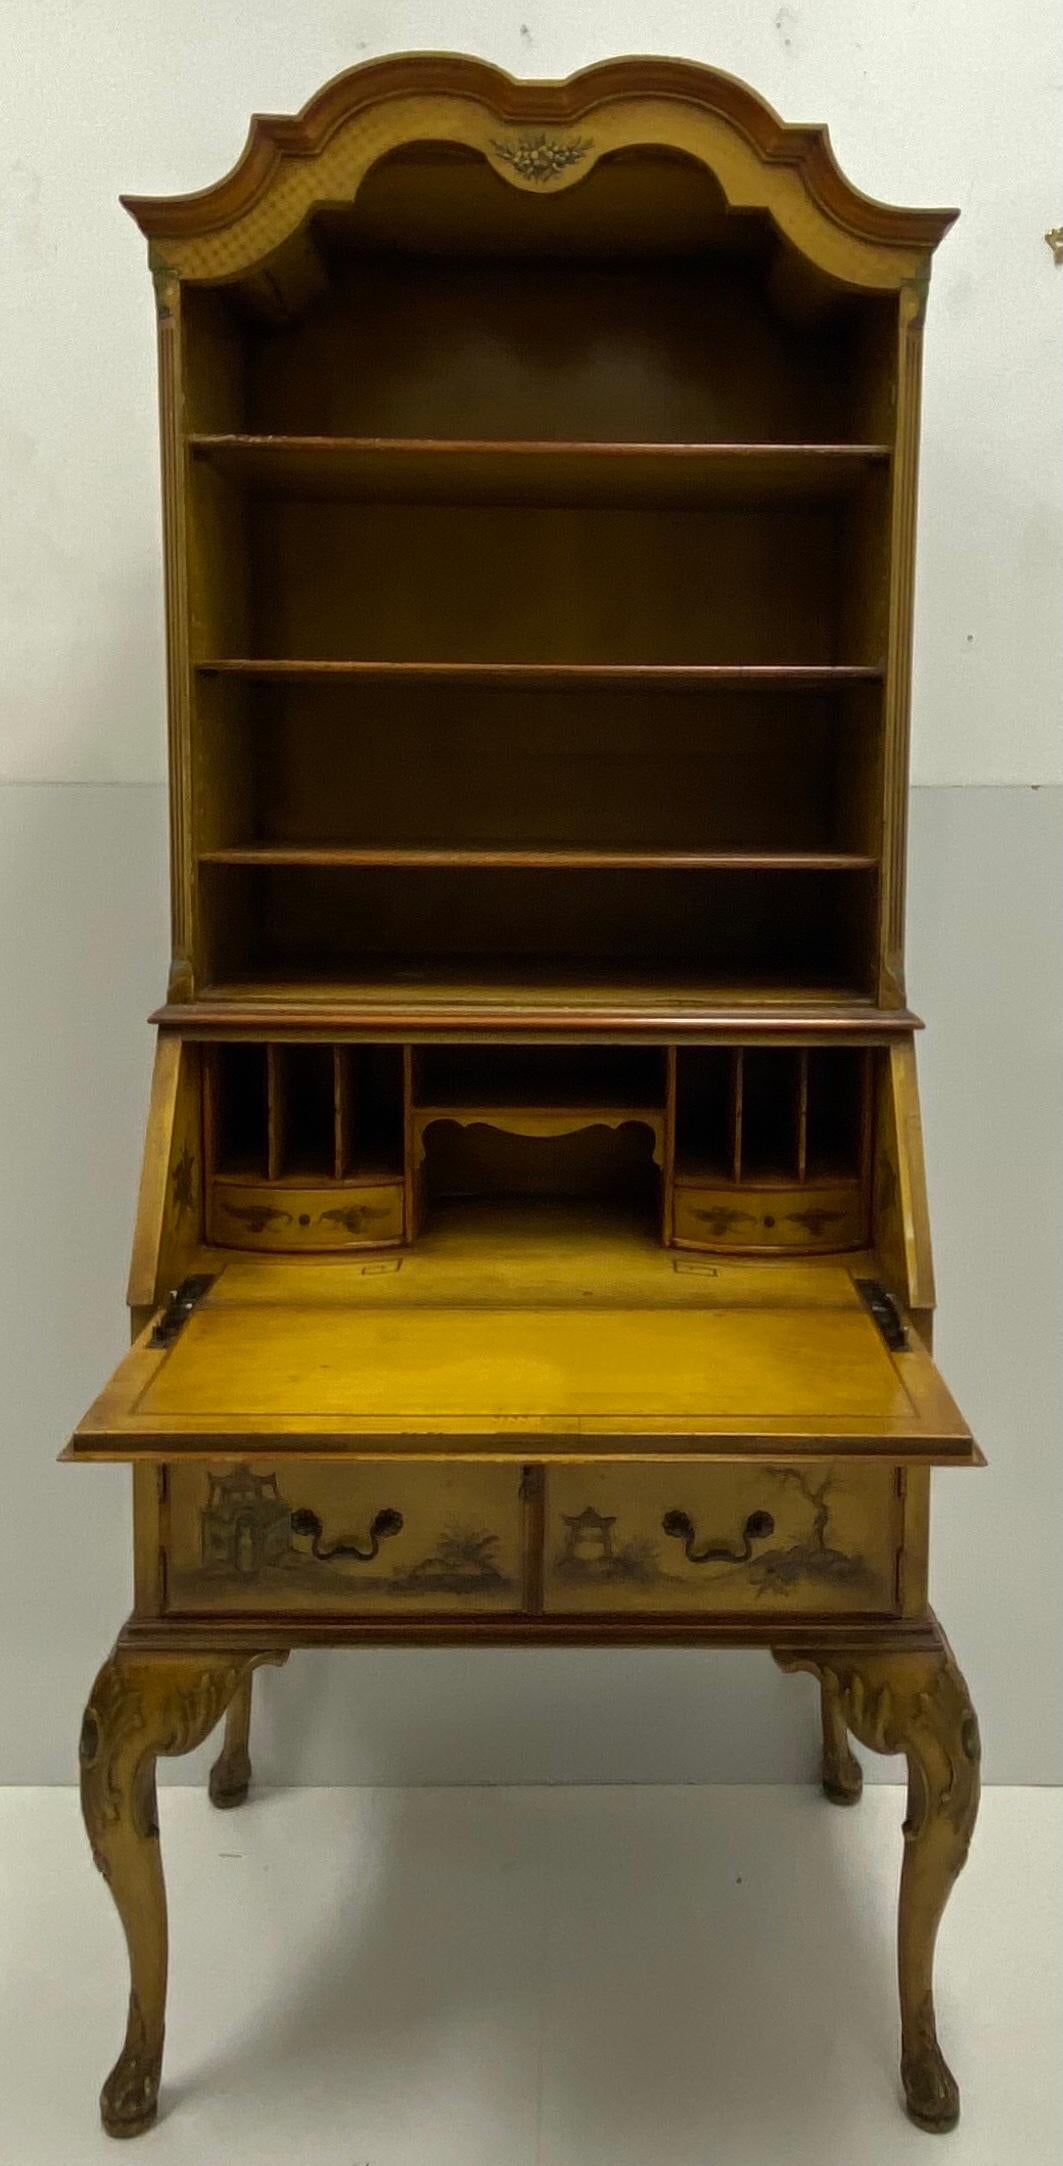 1930s Georgian Style Painted Chinoiserie Secretary Desk with Bookcase In Good Condition For Sale In Kennesaw, GA